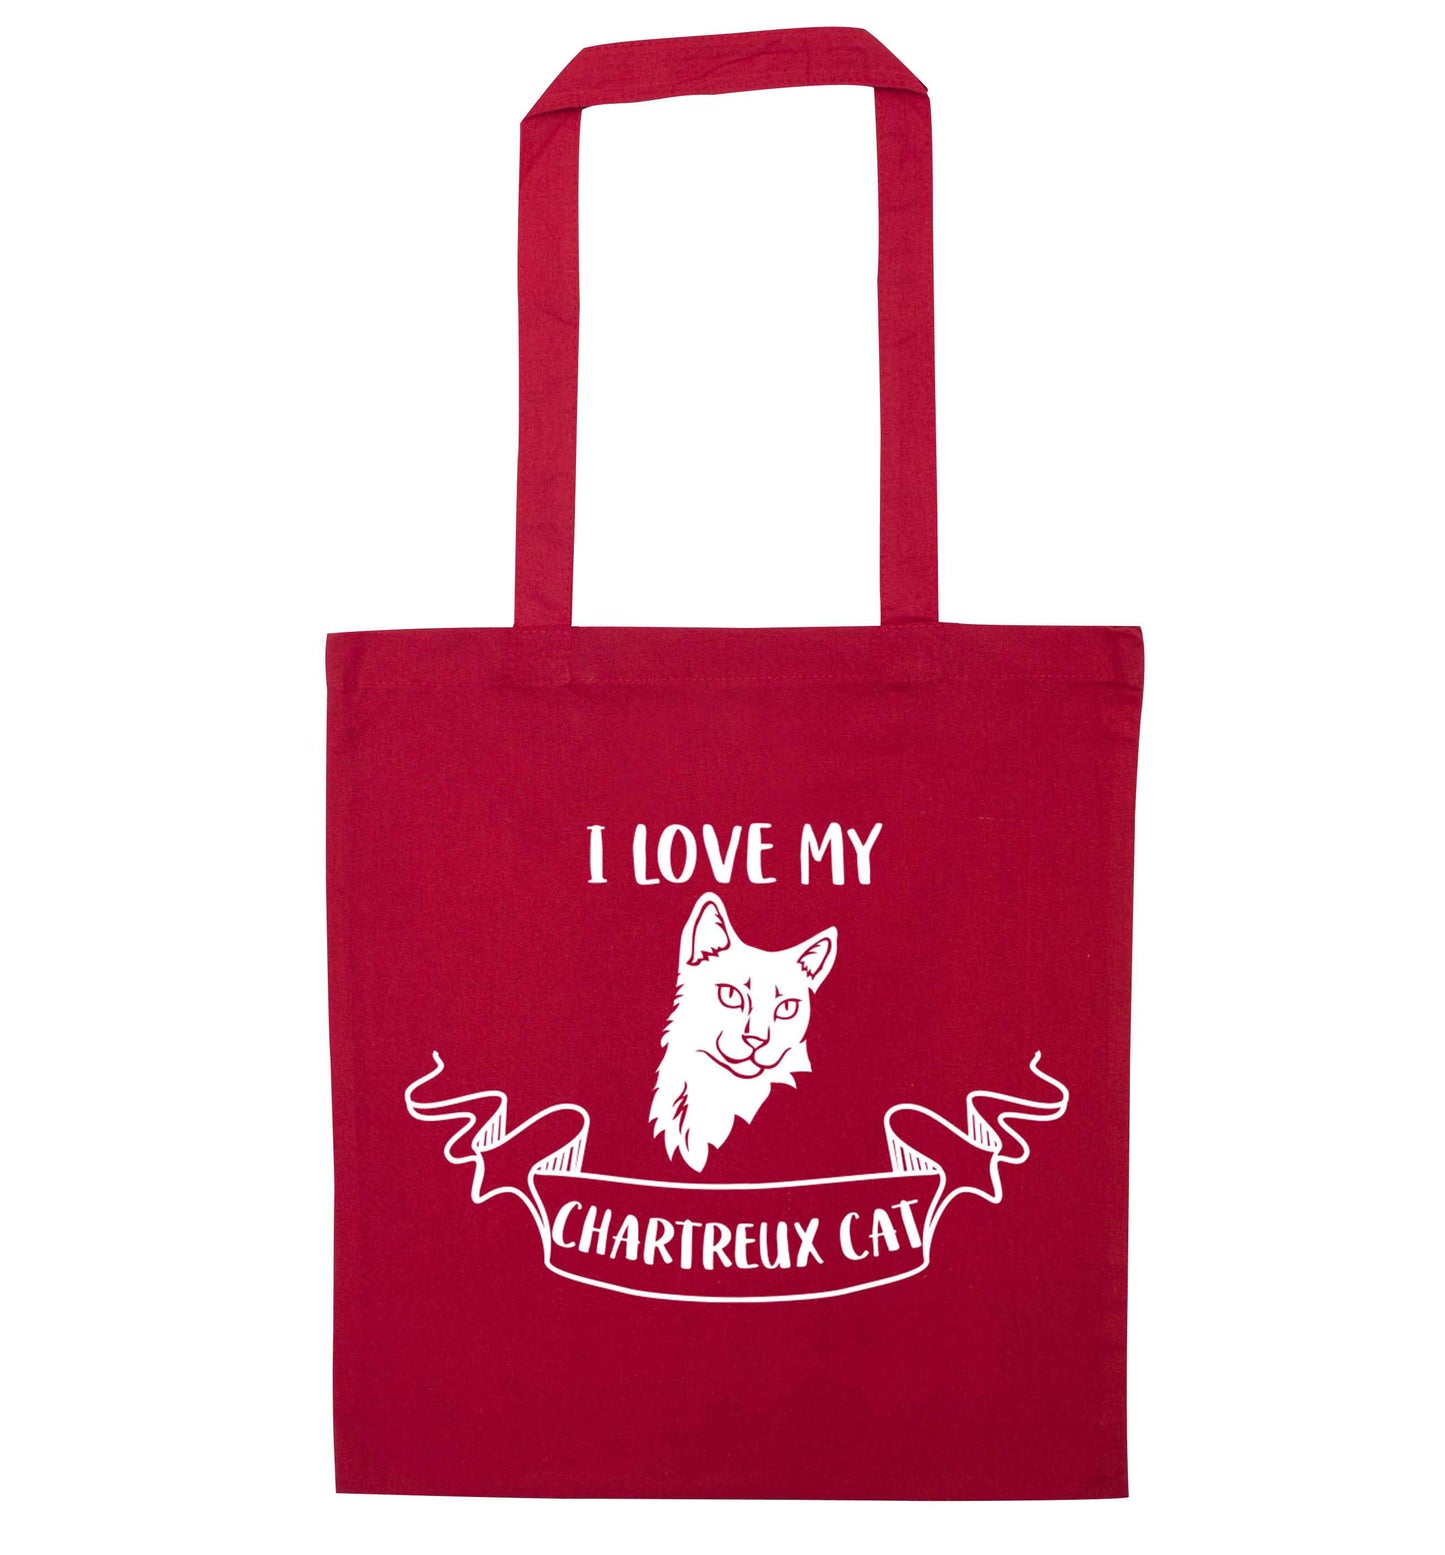 I love my chartreux cat red tote bag